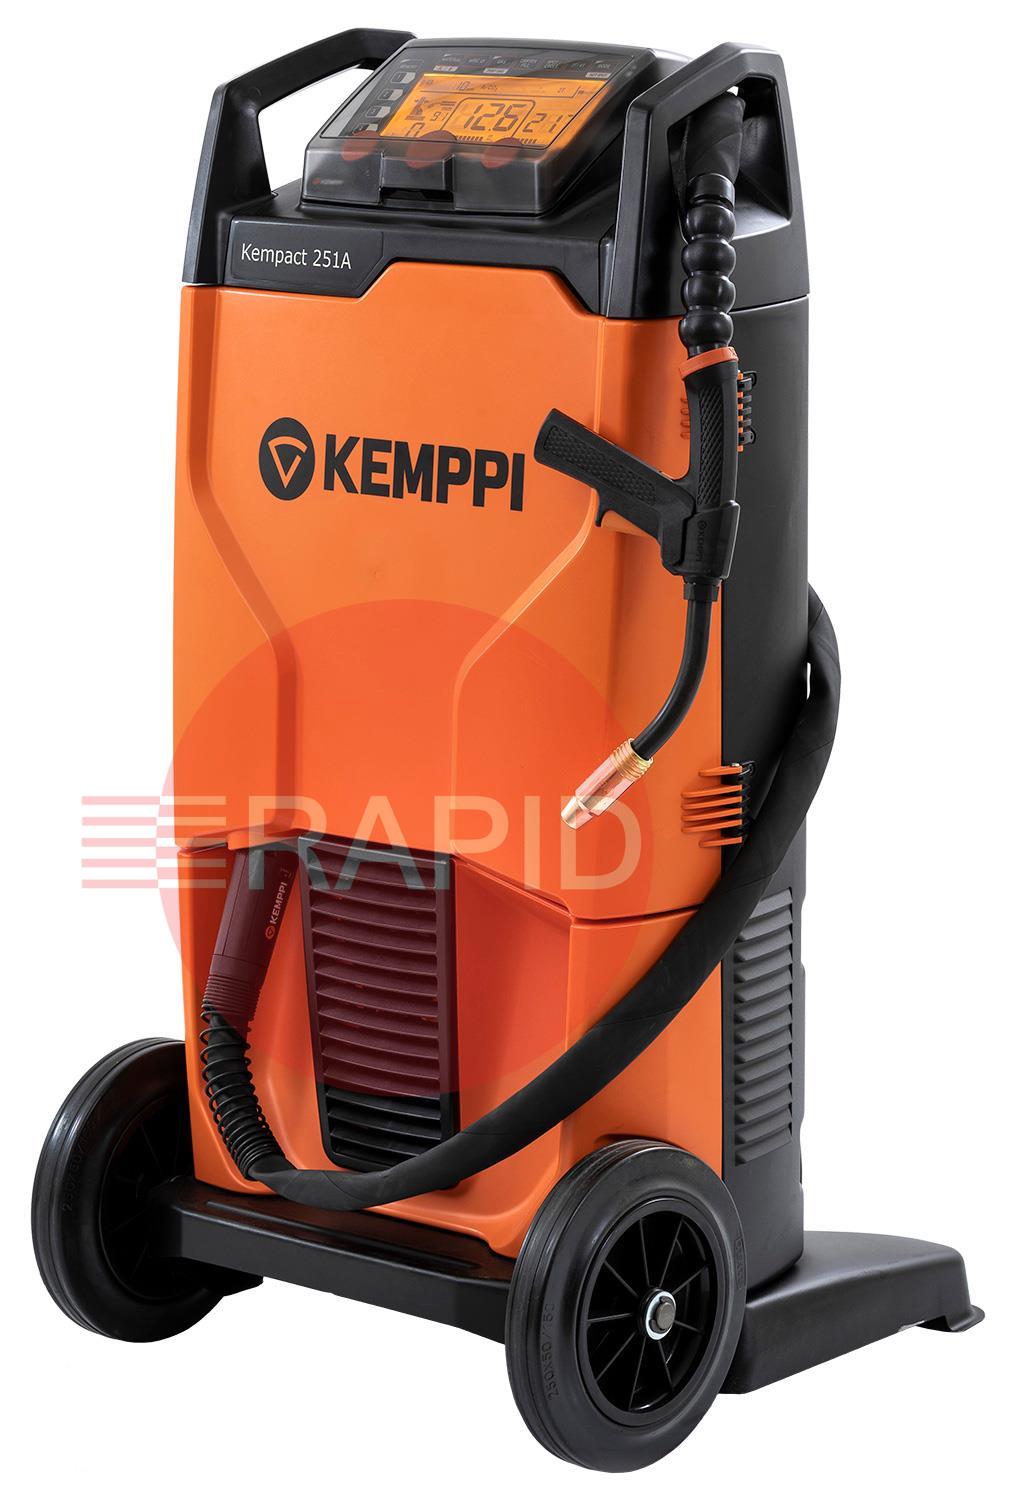 P2306GXE  Kemppi Kempact RA 251A, 250A 1 Phase 230v Mig Welder, with Flexlite GXe 305G 5.0m Torch